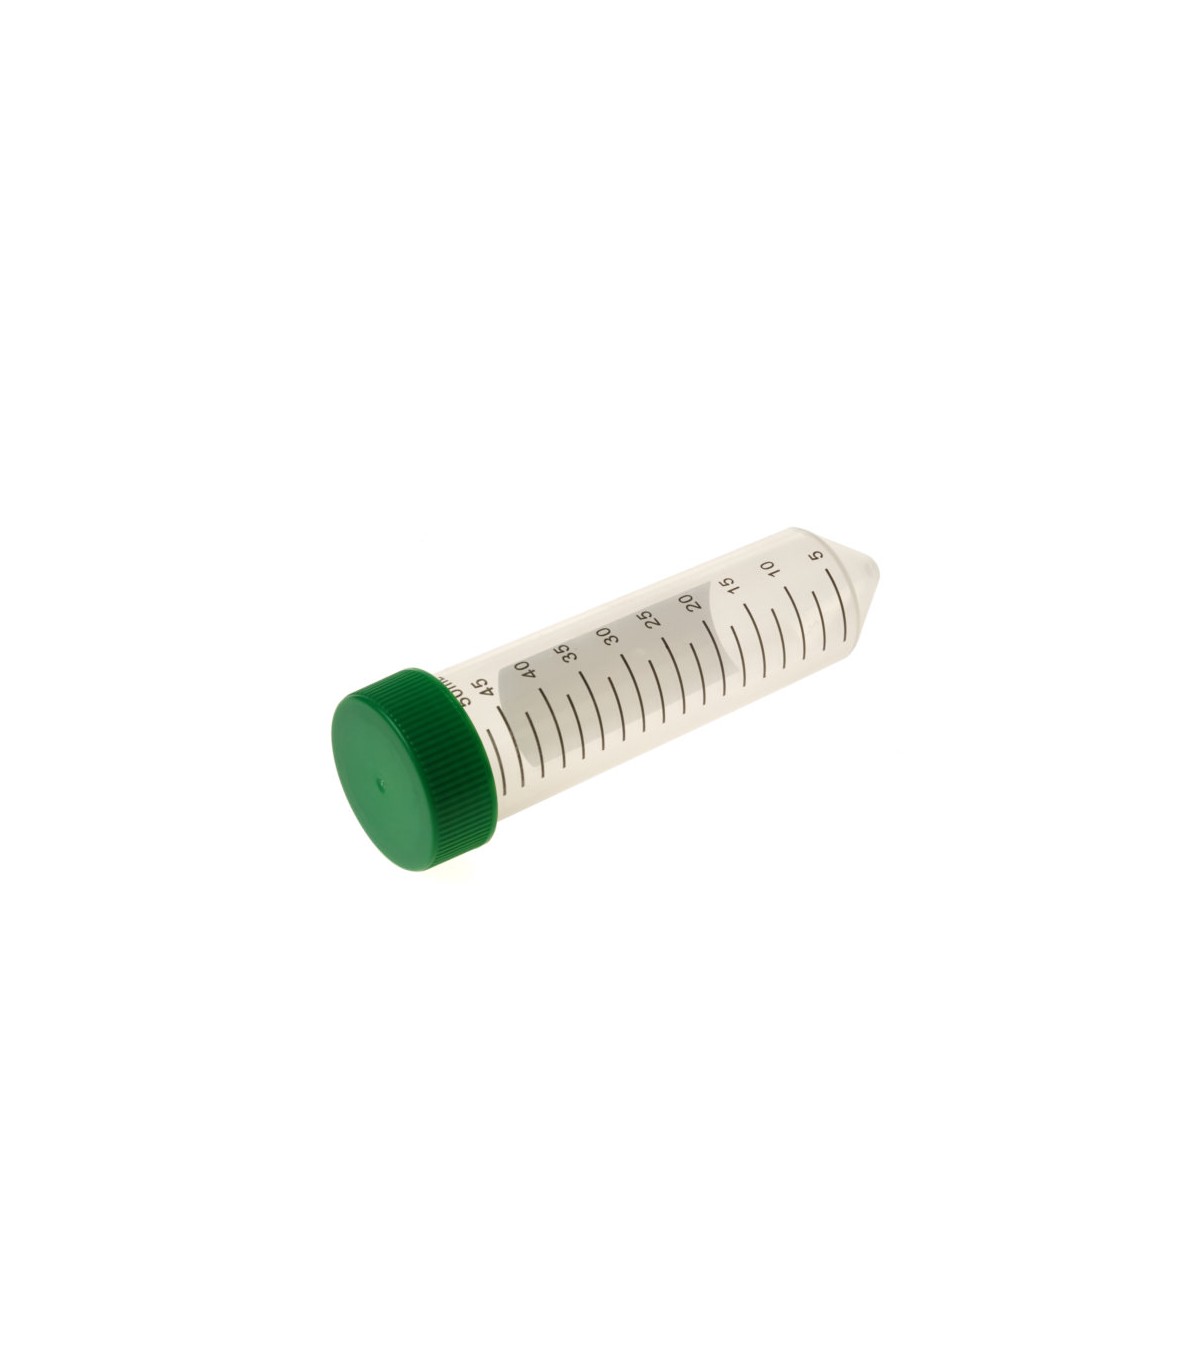 Micro Centrifuge Tube 2mL with snap cap Bag of 200